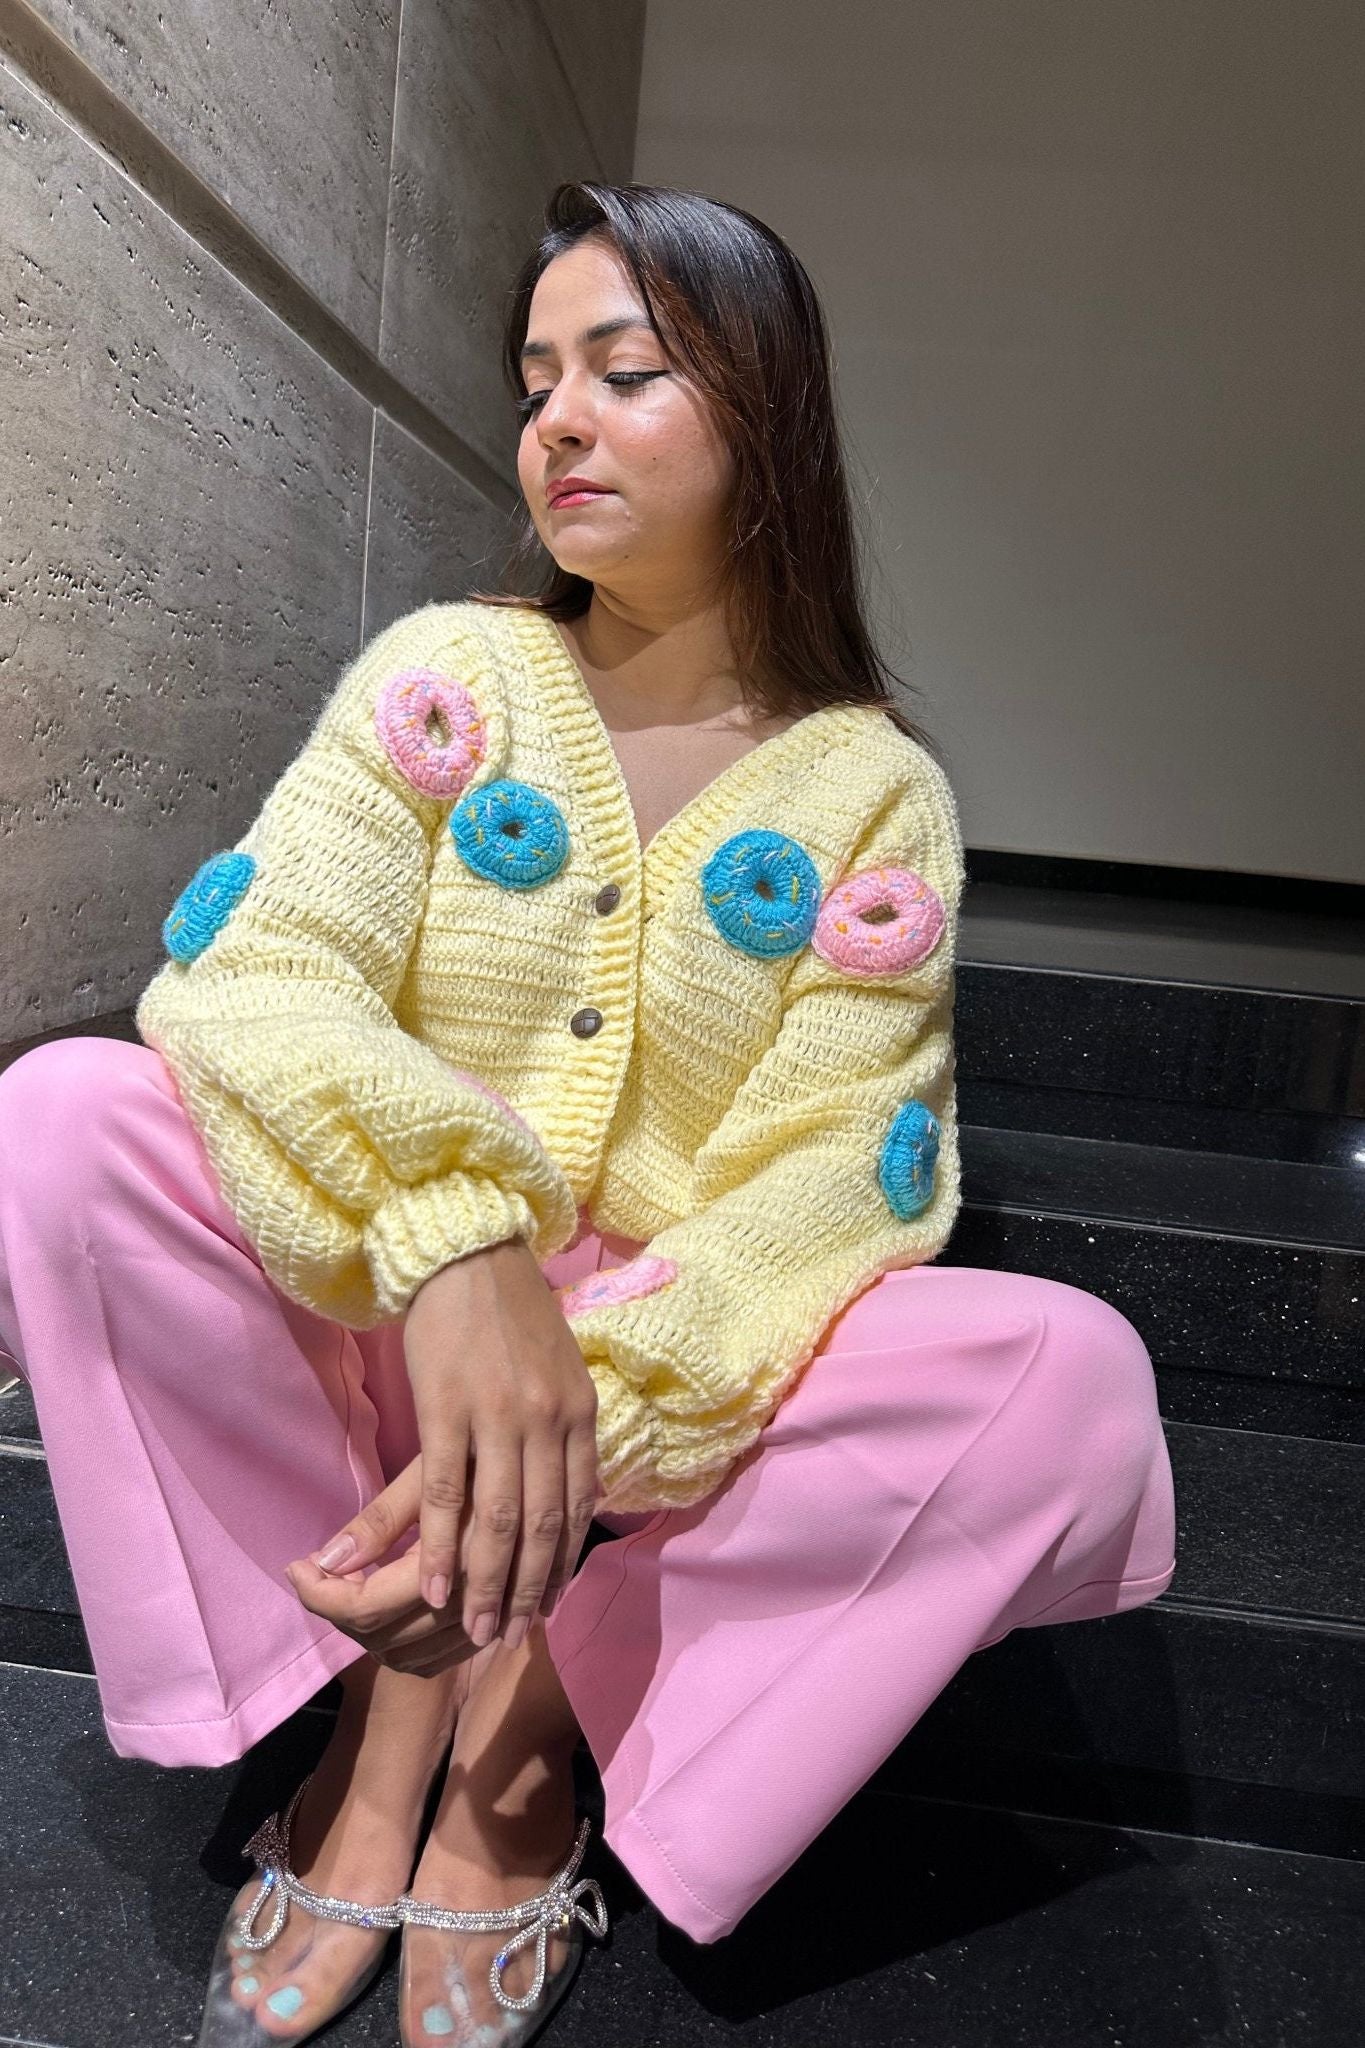 Donuts sweater - SUGERCANDY